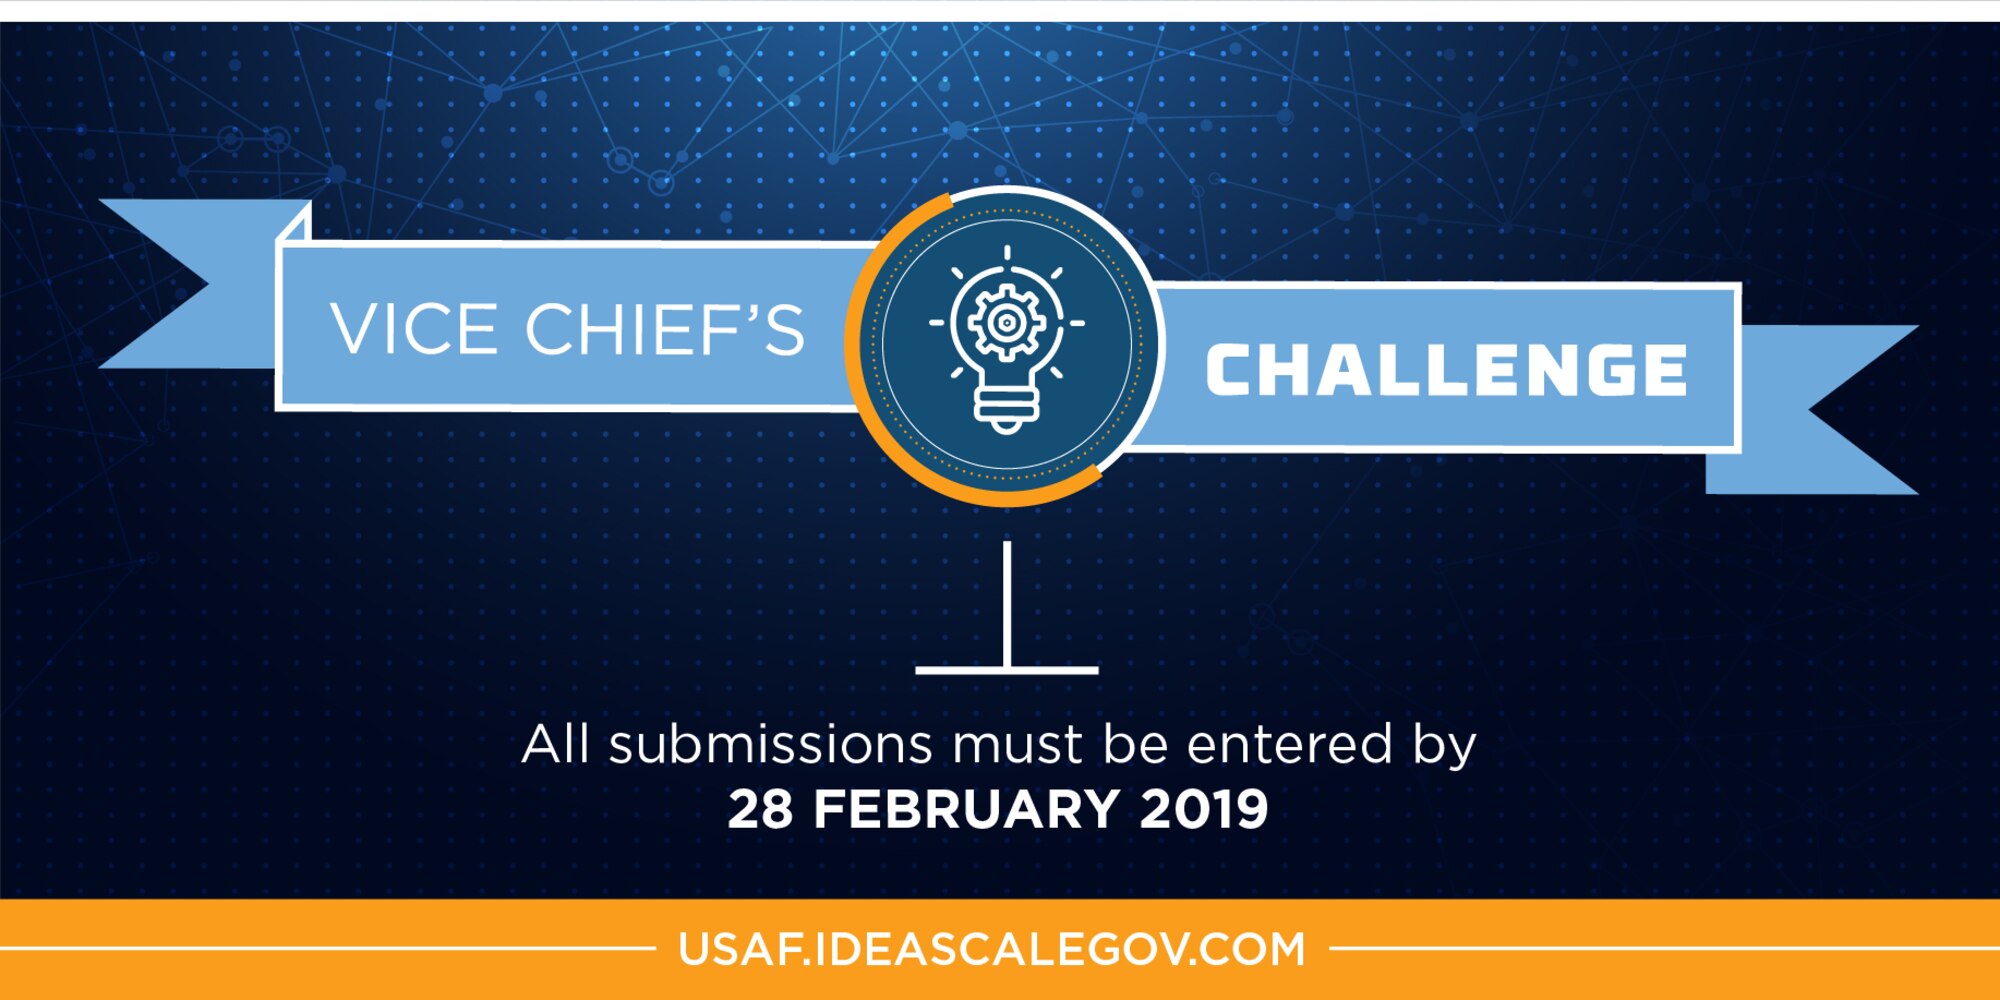 Inaugural Vice Chief’s Challenge seeks game-changing innovations